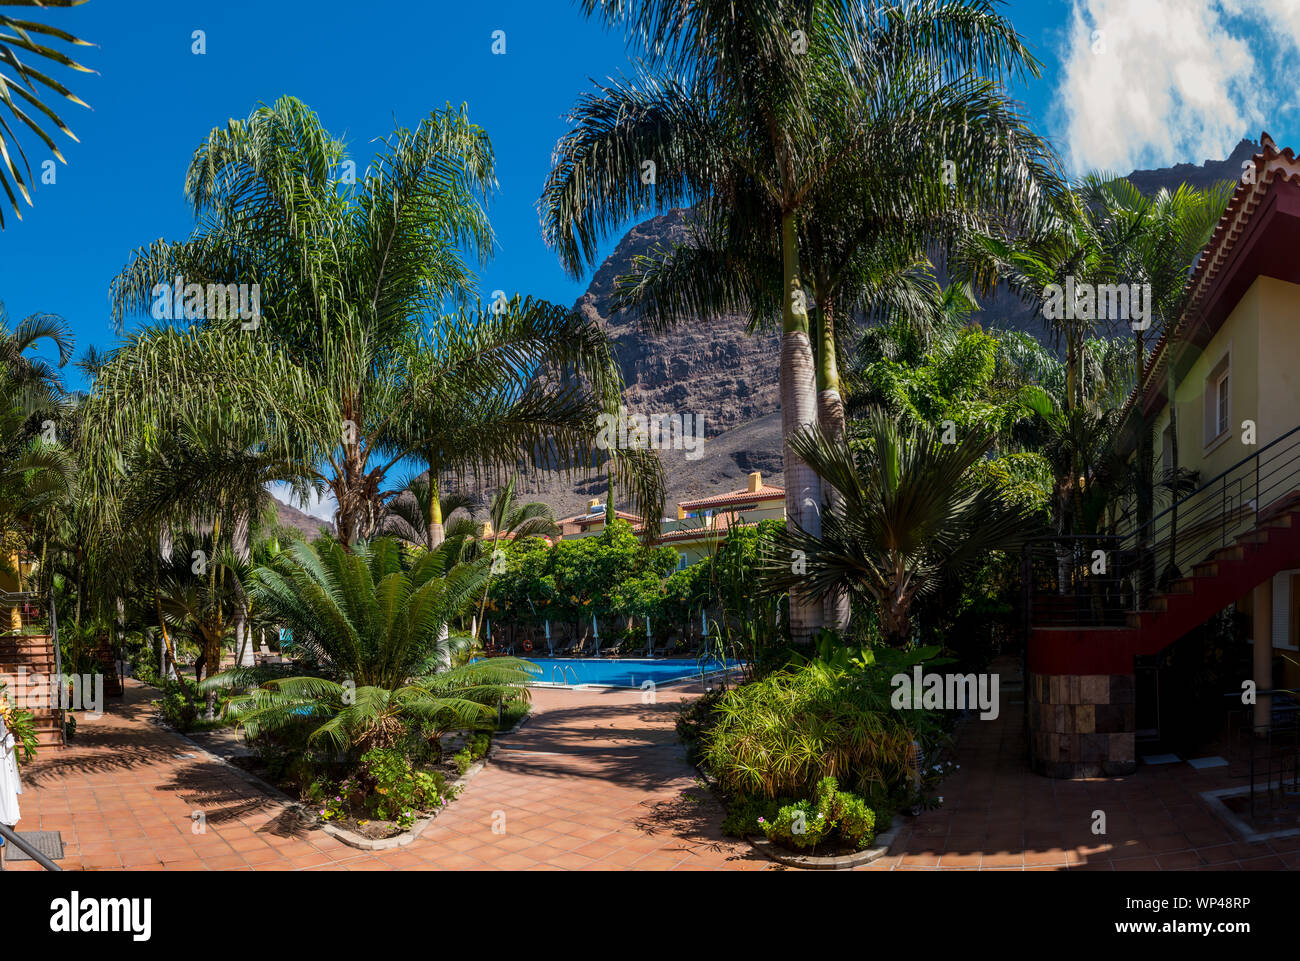 Attractive semi-tropical gardens an pool in La Calera, La Gomera, Canary Islands with large palm trees, blue sky and rocky mountain backdrop Stock Photo